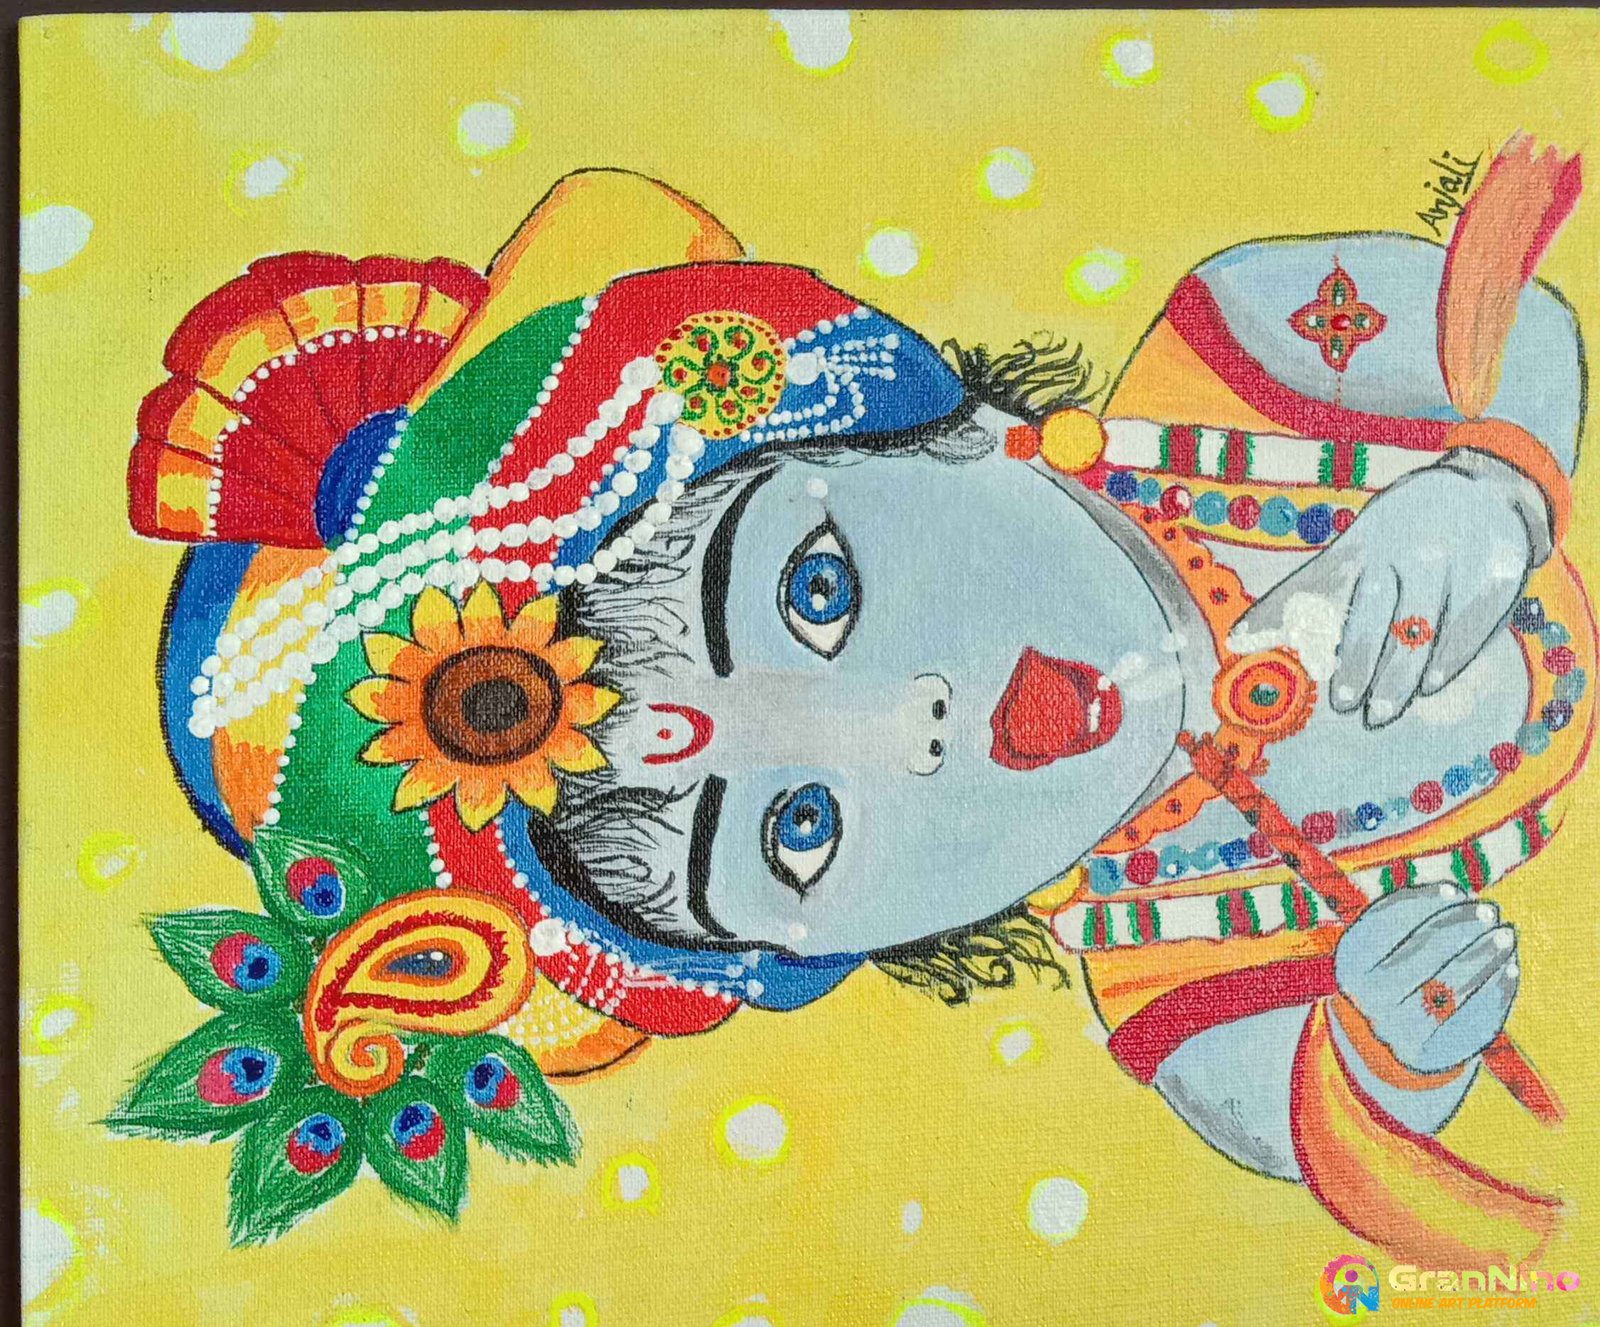 Lord Krishna painting from Russia Drawing by Elena Sysoeva - Pixels